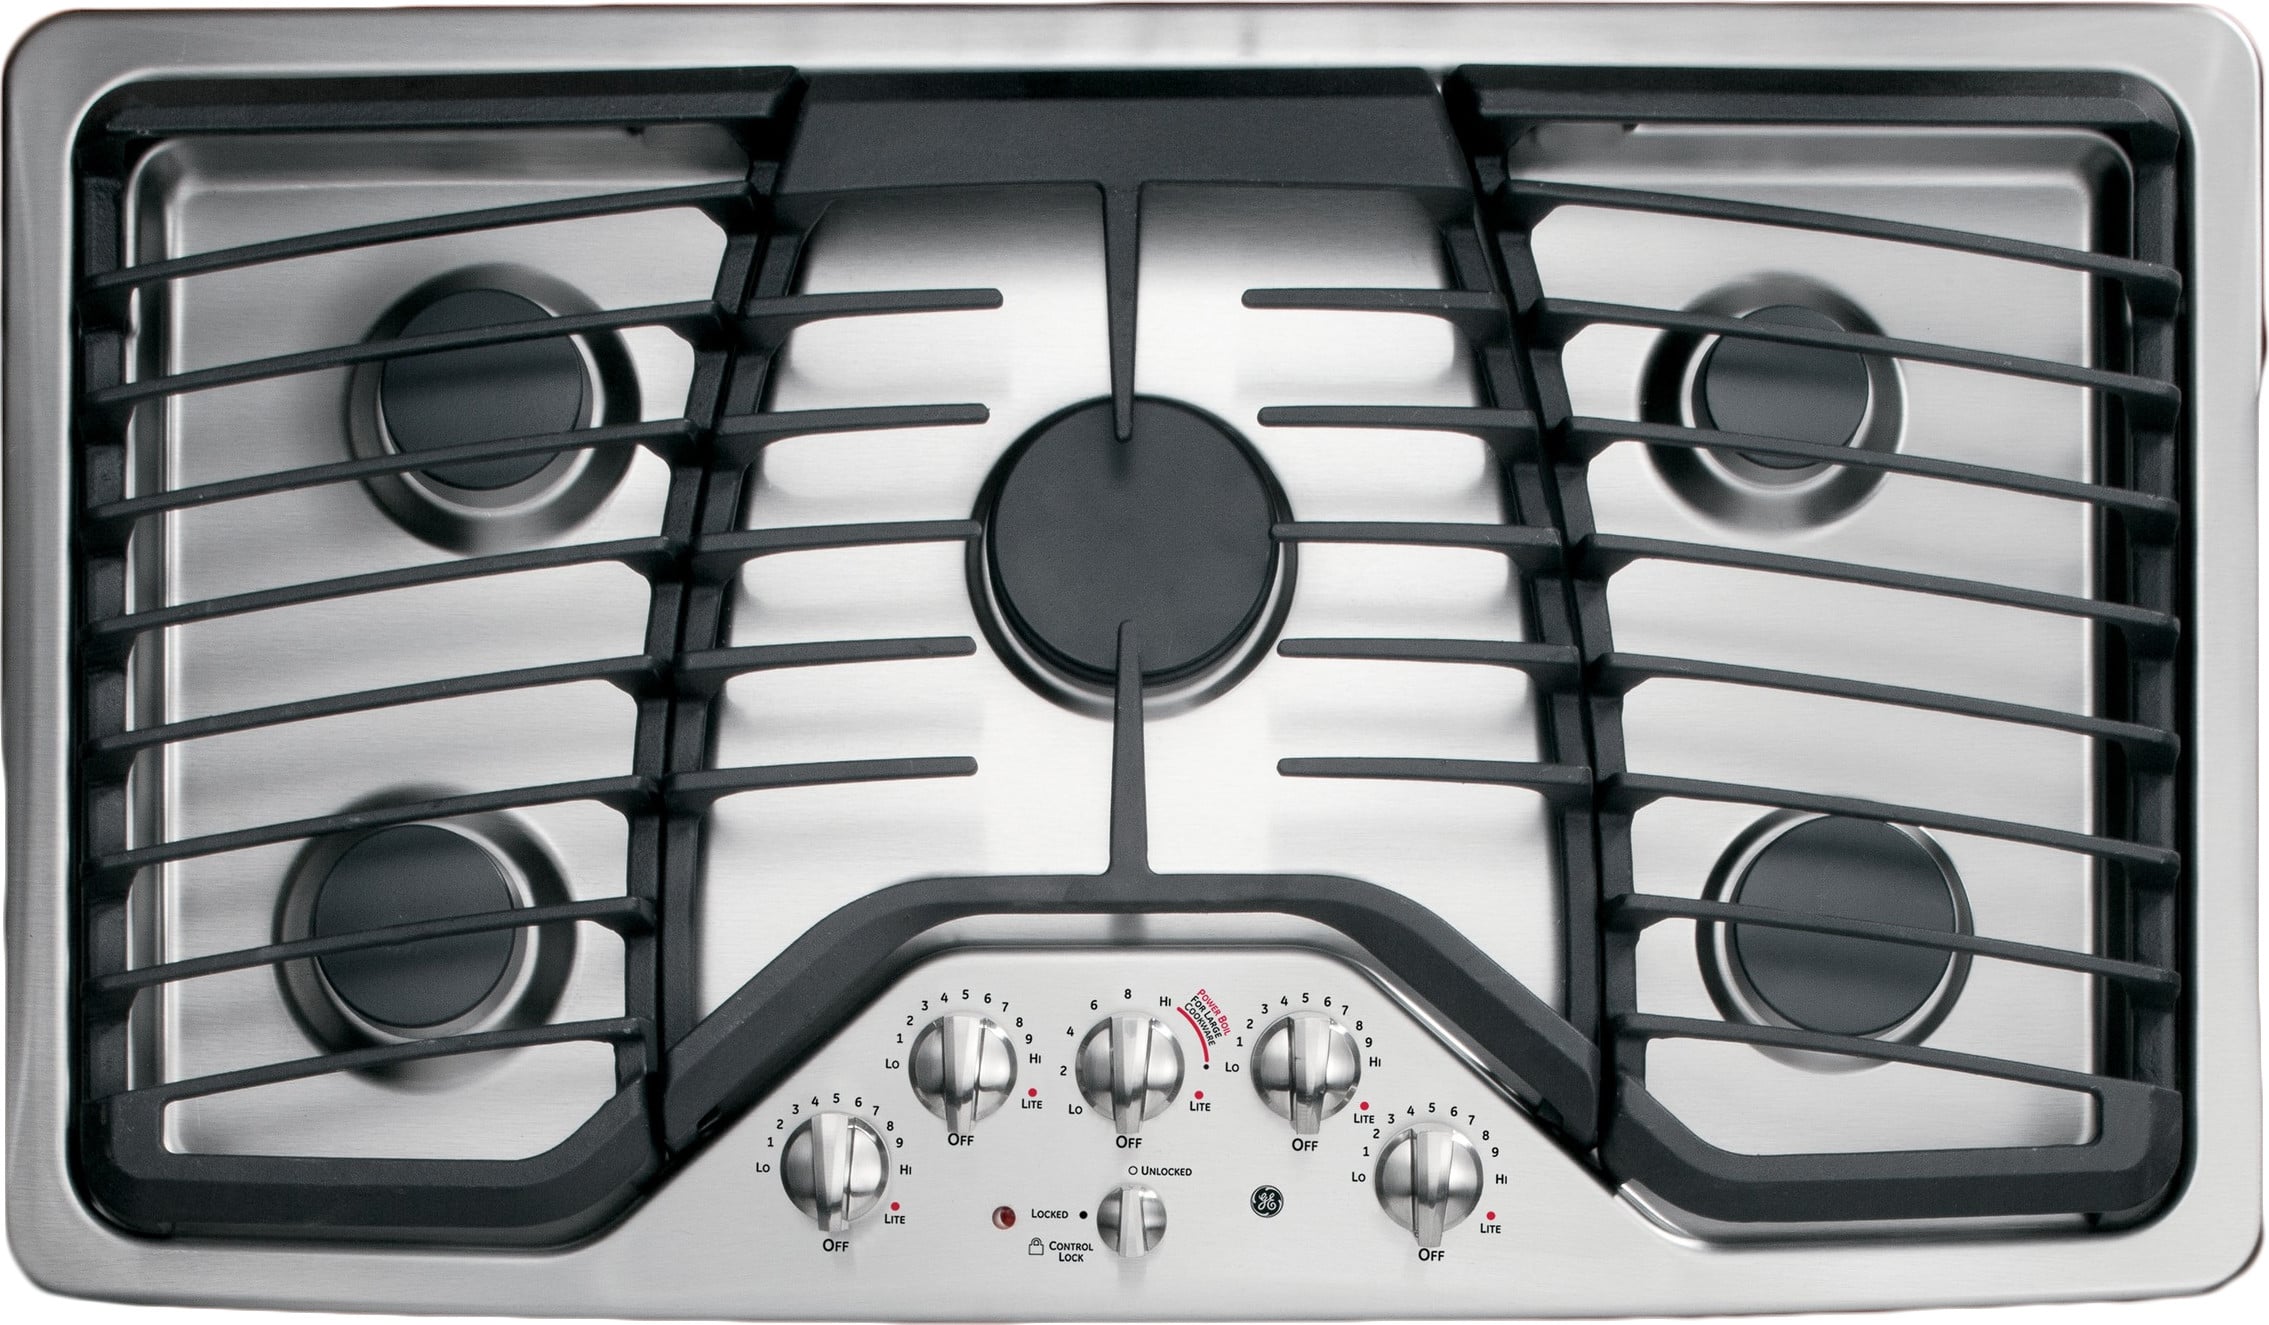 ge-pgp976setss-36-inch-gas-cooktop-with-5-sealed-burners-17-000-btu